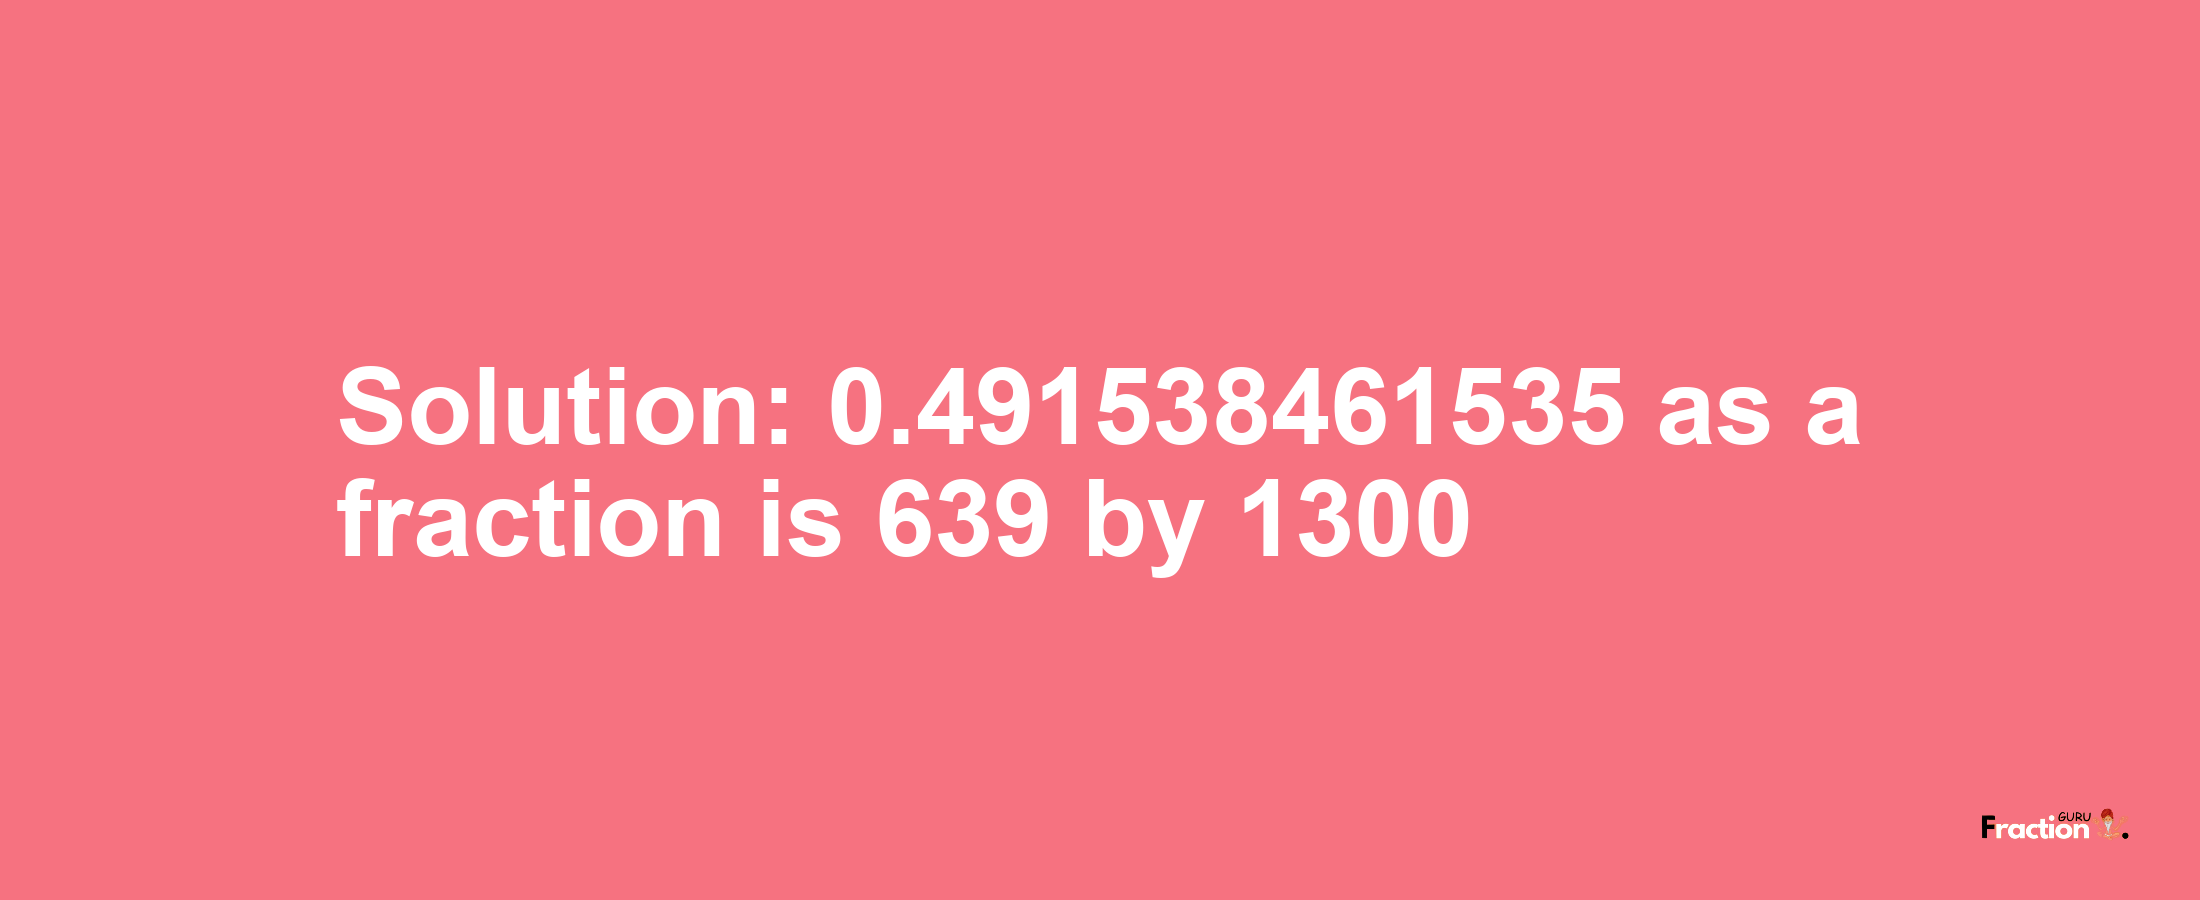 Solution:0.491538461535 as a fraction is 639/1300